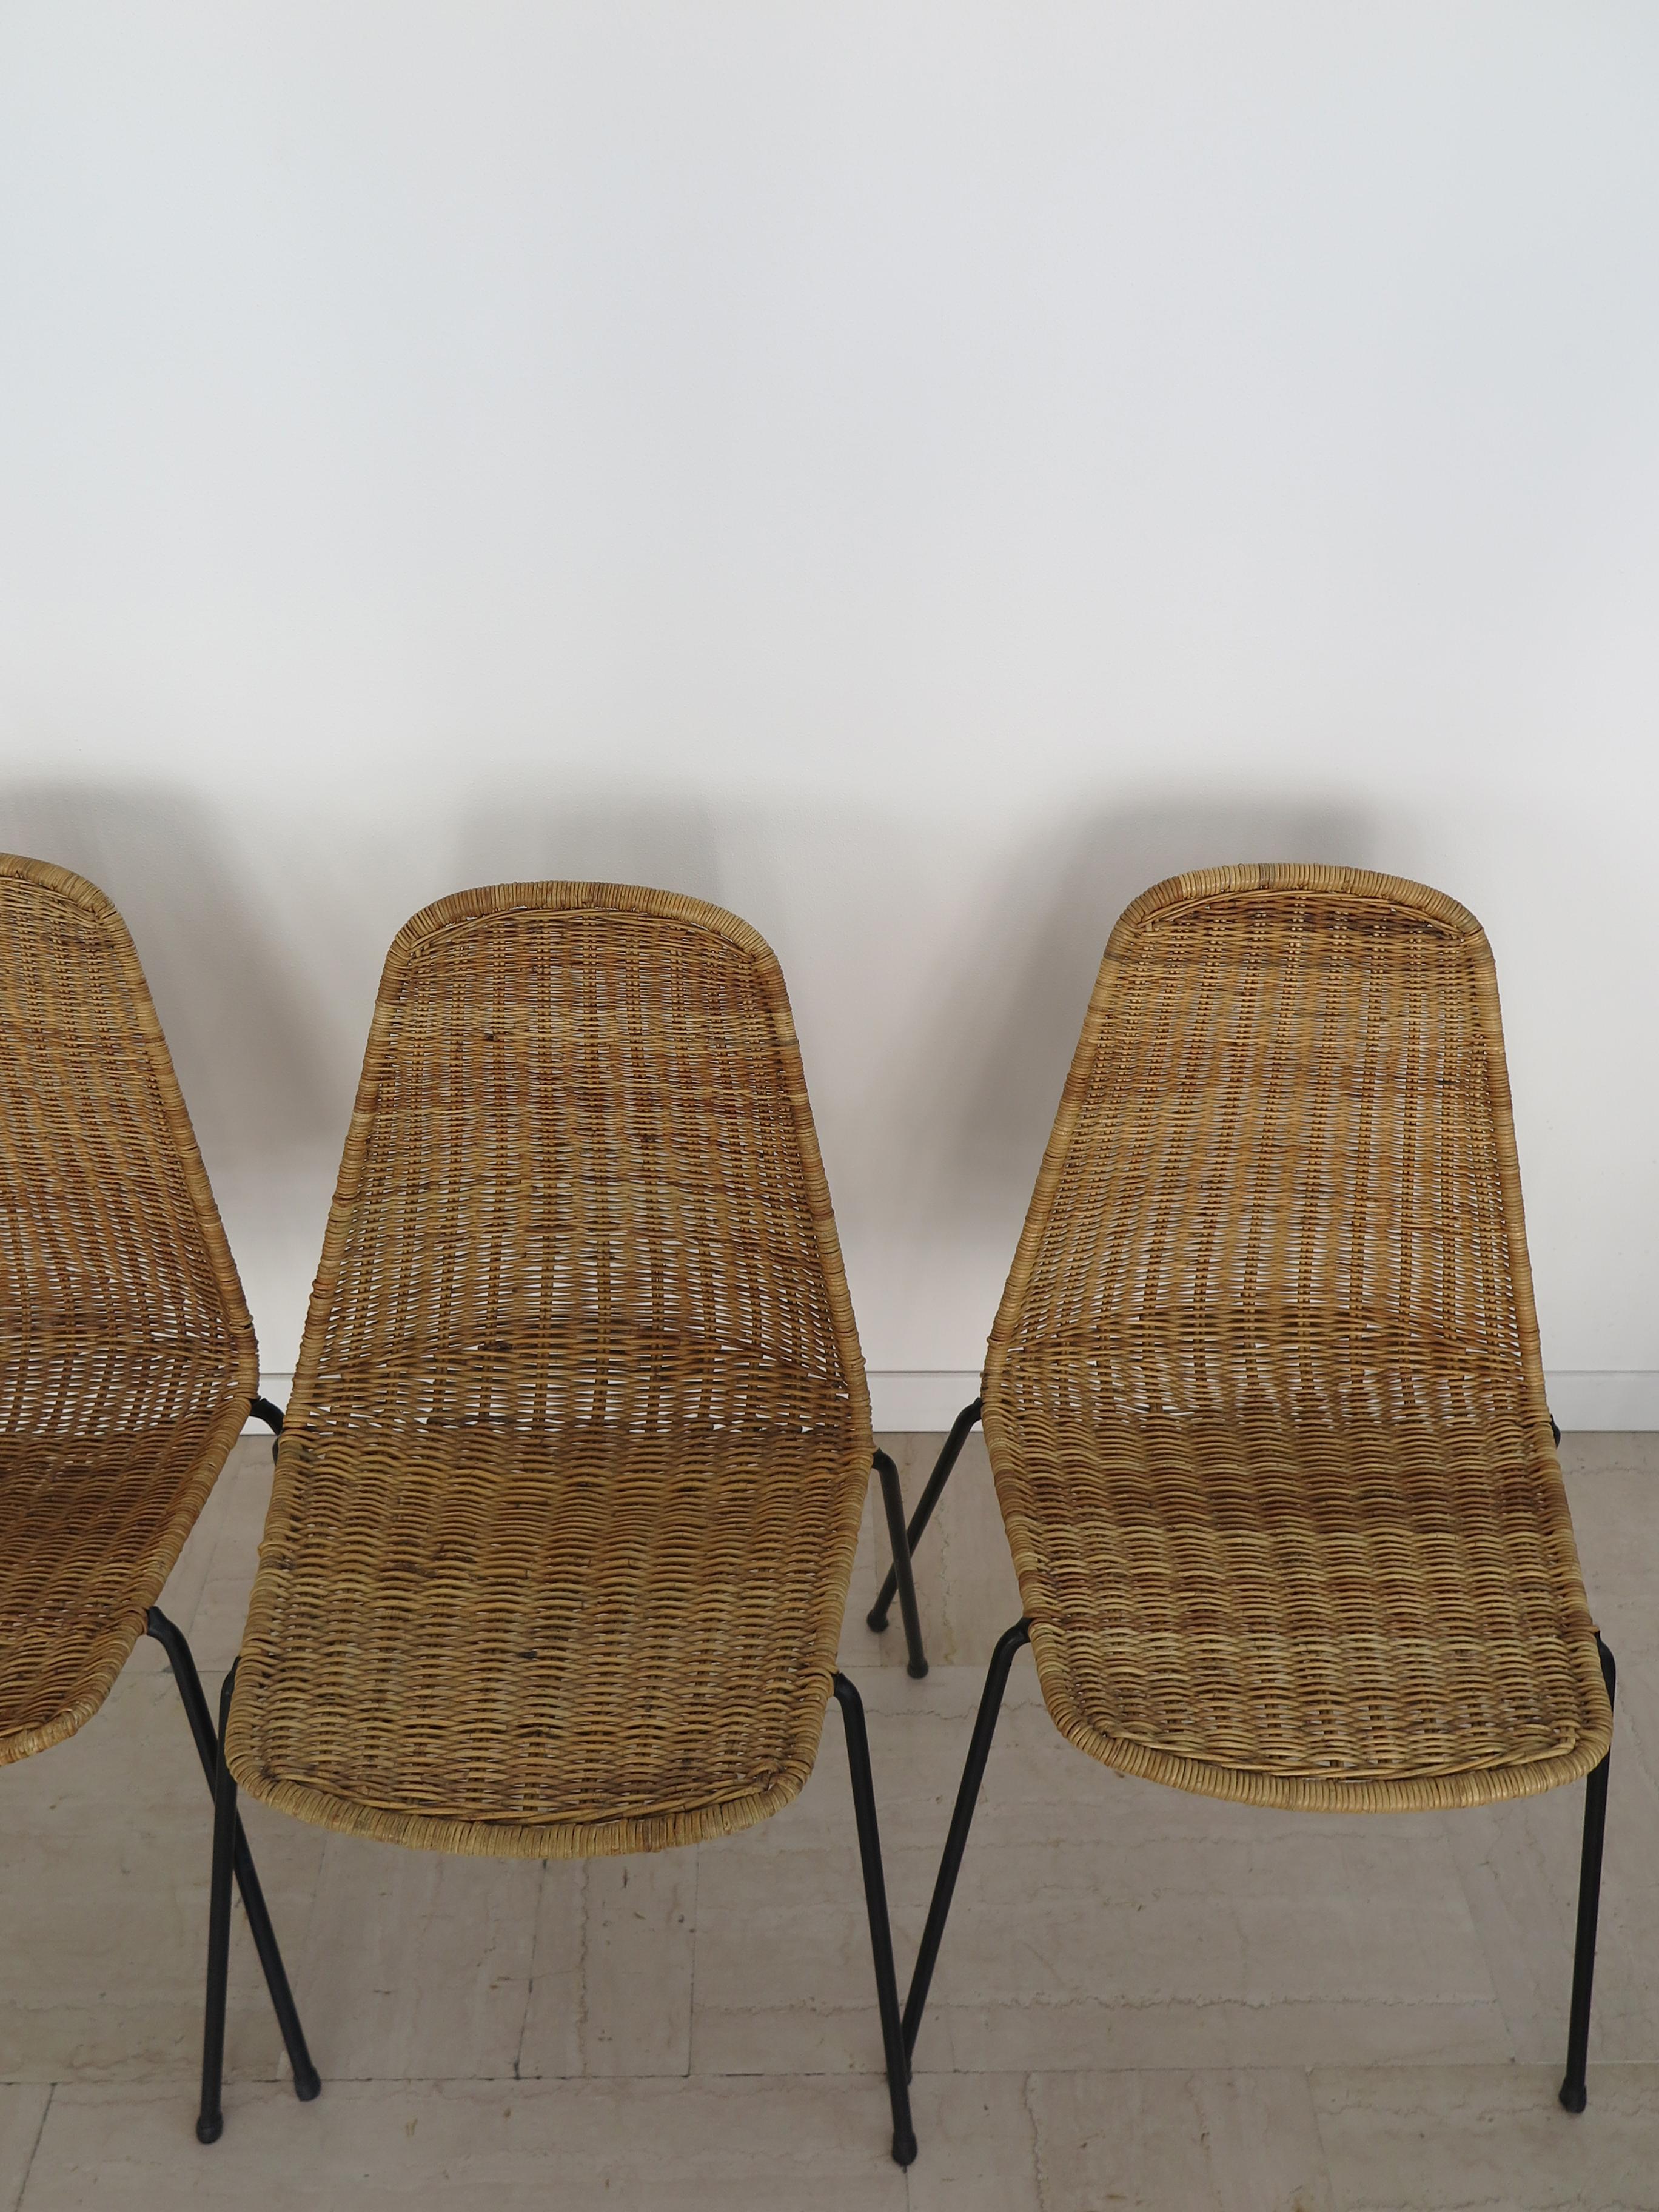 Mid-20th Century Italian Midcentury Rattan Dining Chairs Design Campo & Graffi for Home, 1950s For Sale